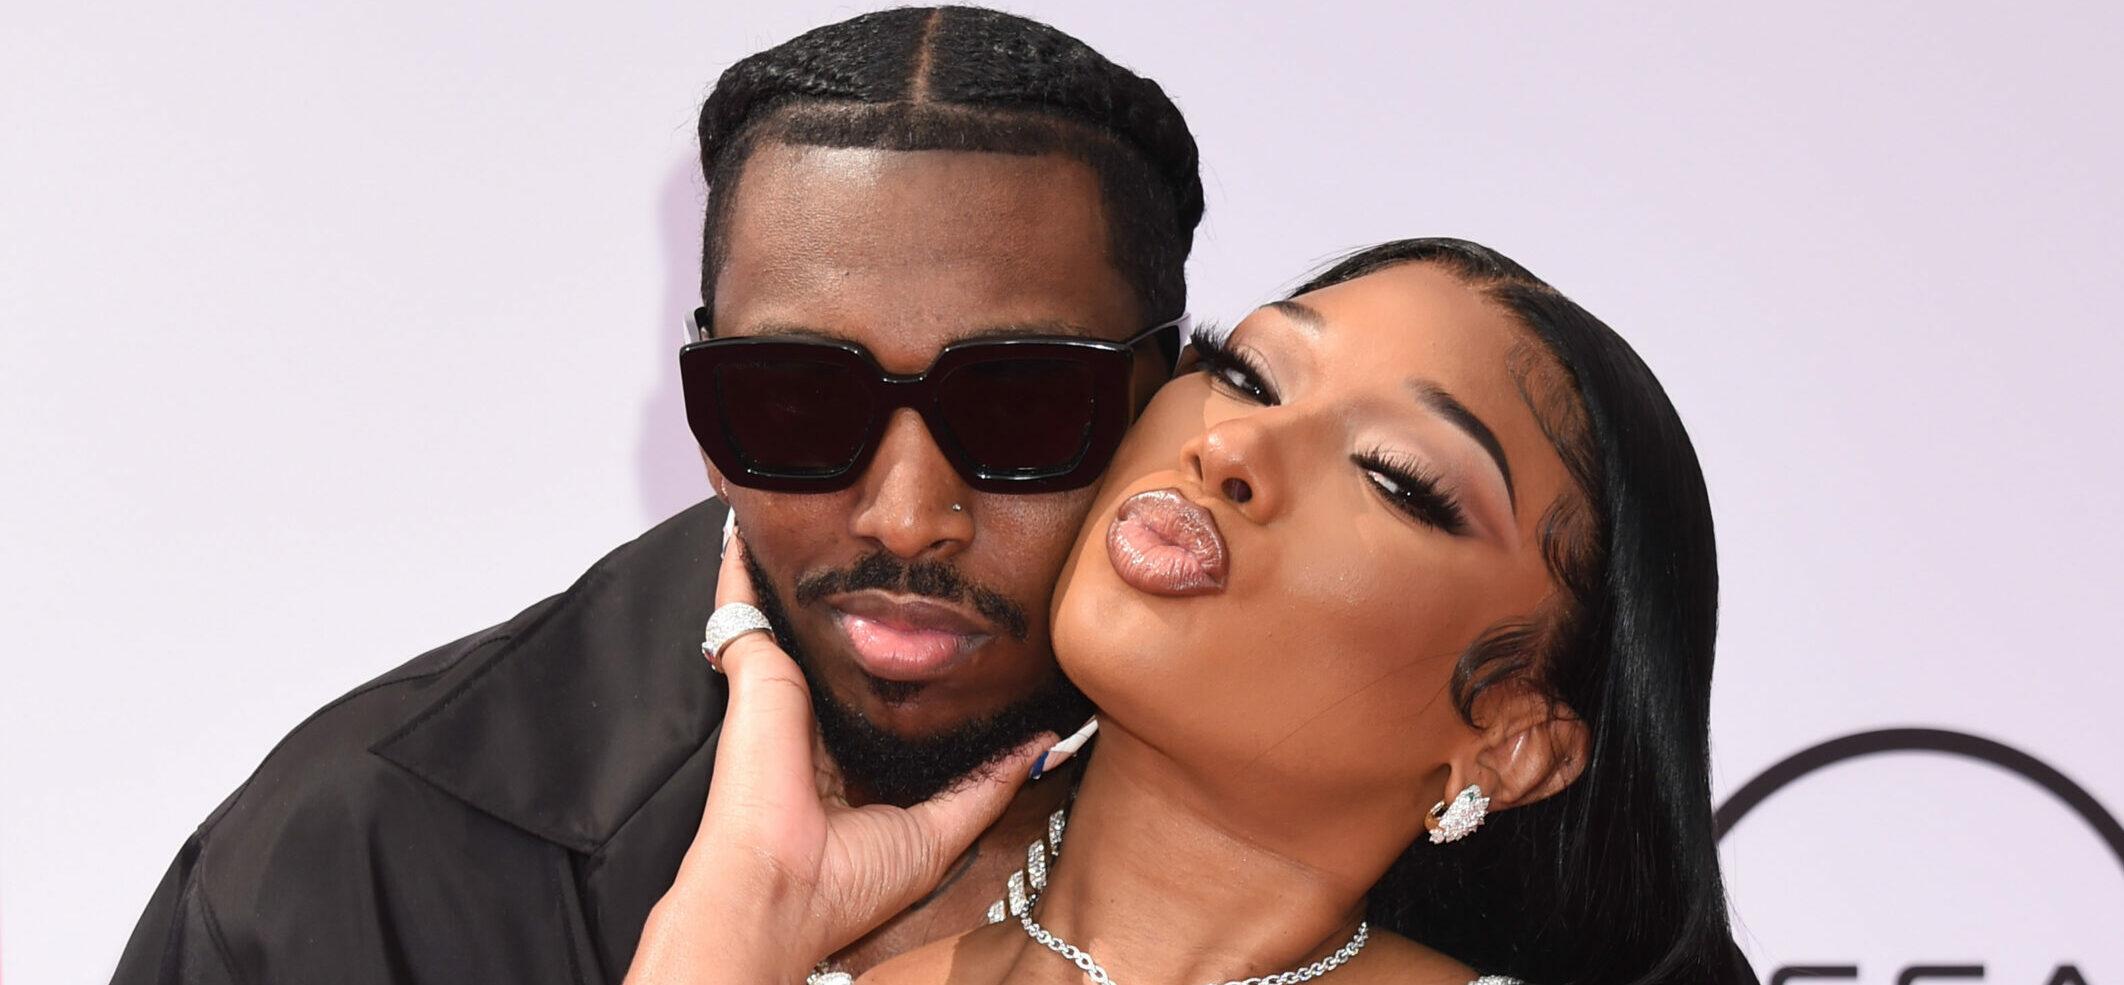 Pardison Fontaine Gifts Megan Thee Stallion Huge Diamond Chain For 1-Year Dating Anniversary